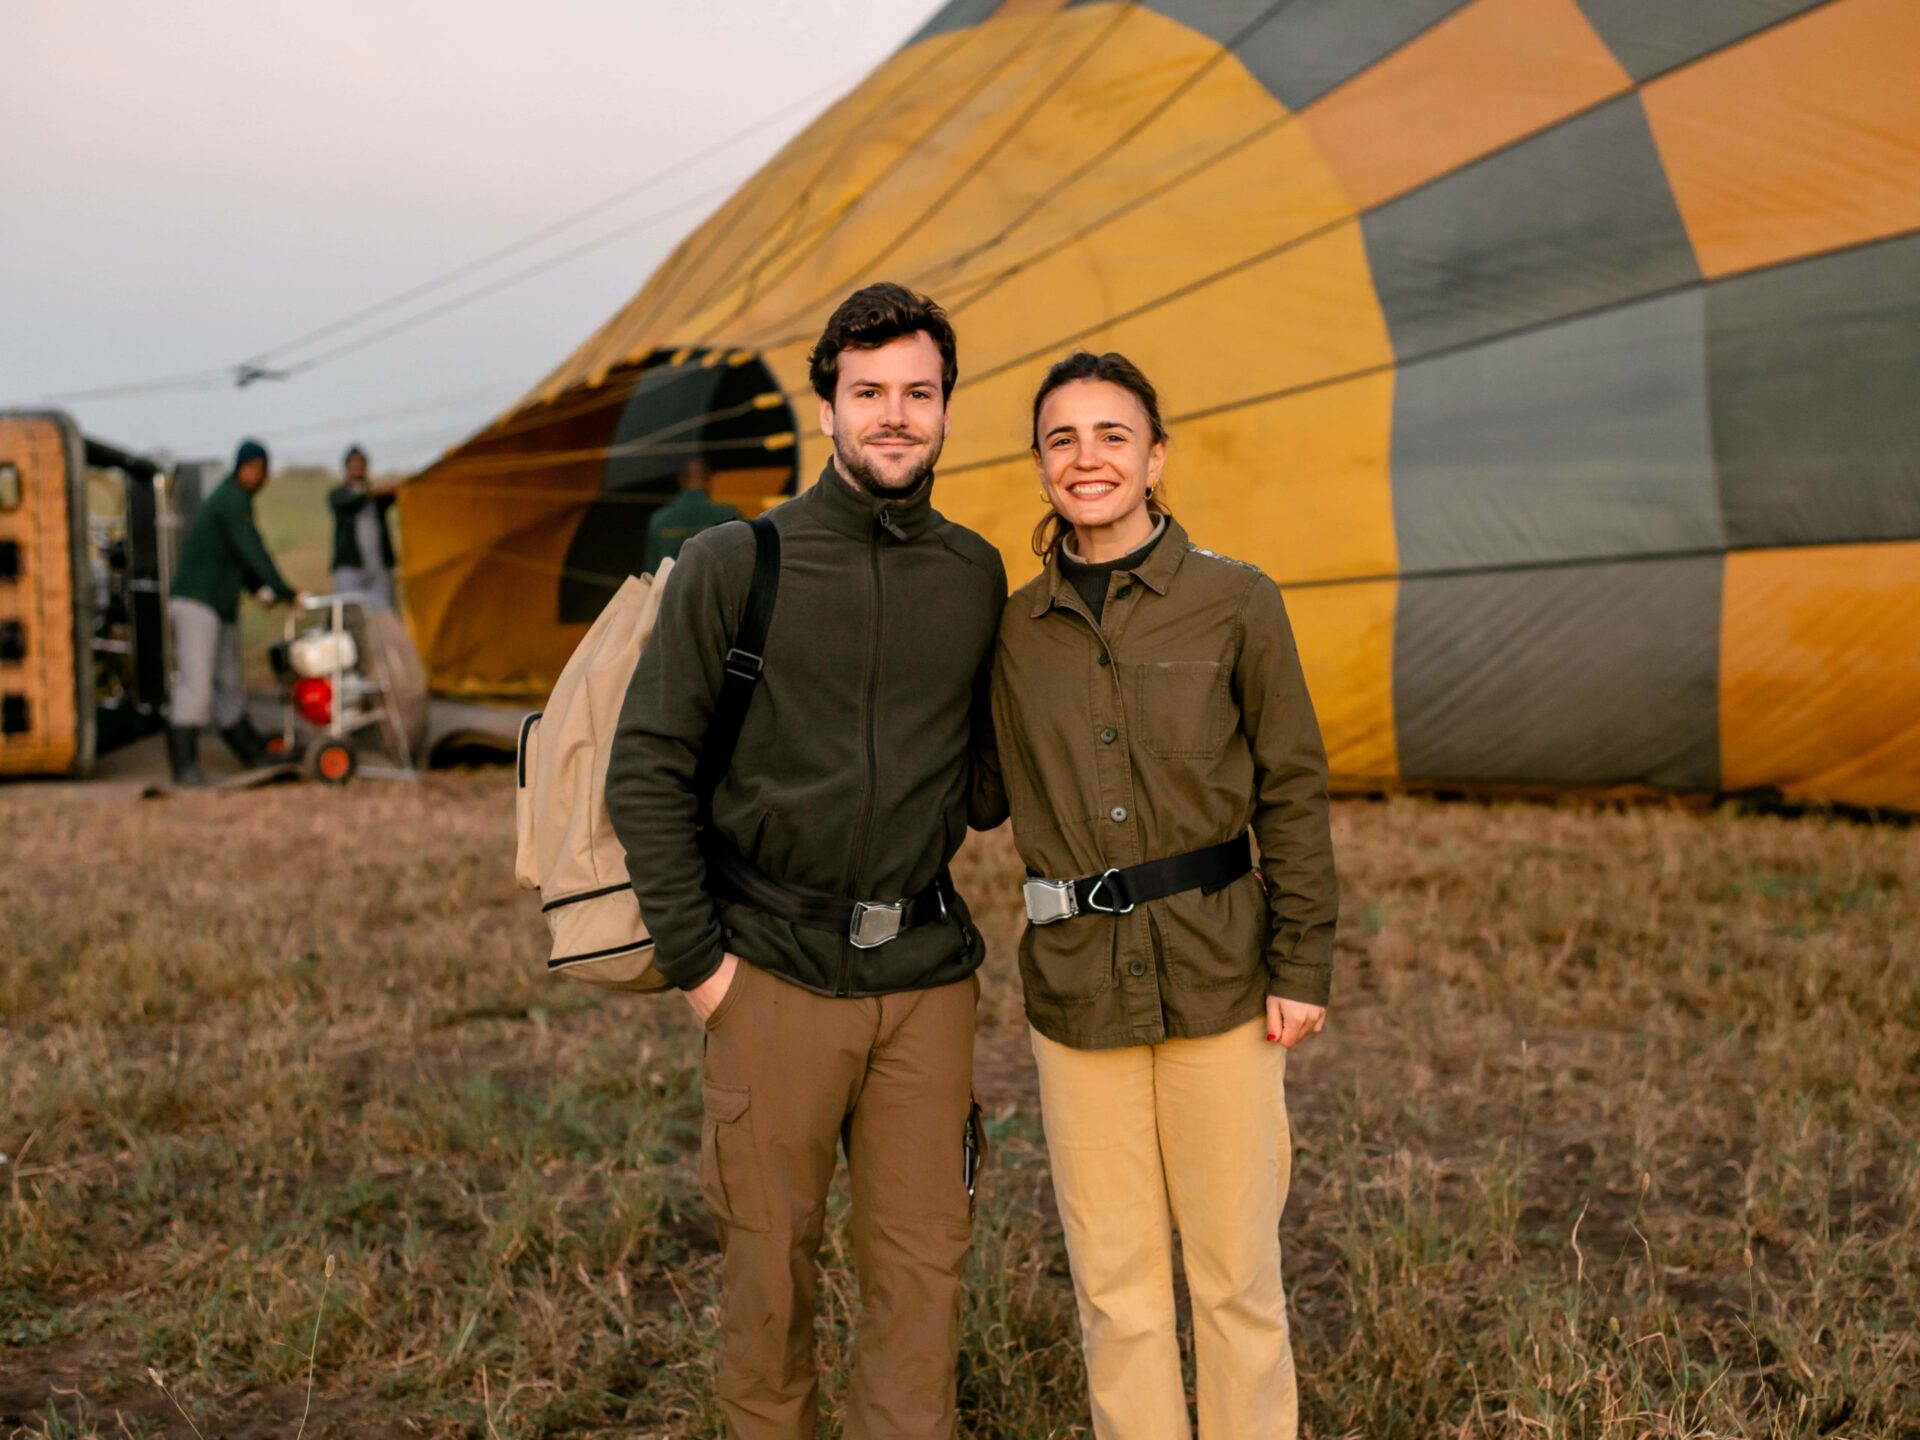 backpacks in a hot air balloon ride